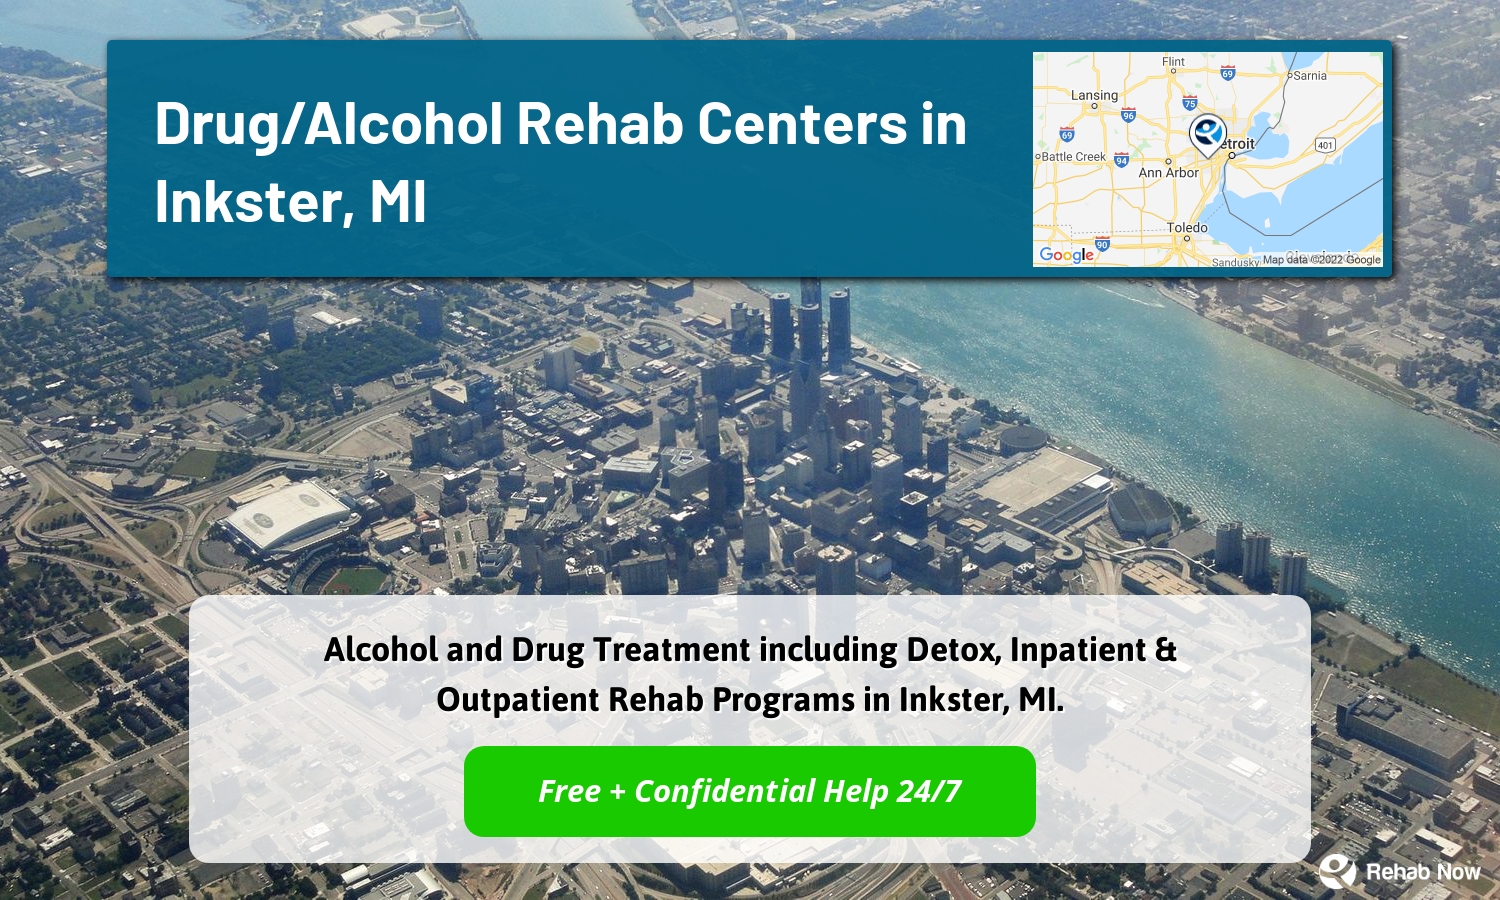 Alcohol and Drug Treatment including Detox, Inpatient & Outpatient Rehab Programs in Inkster, MI.